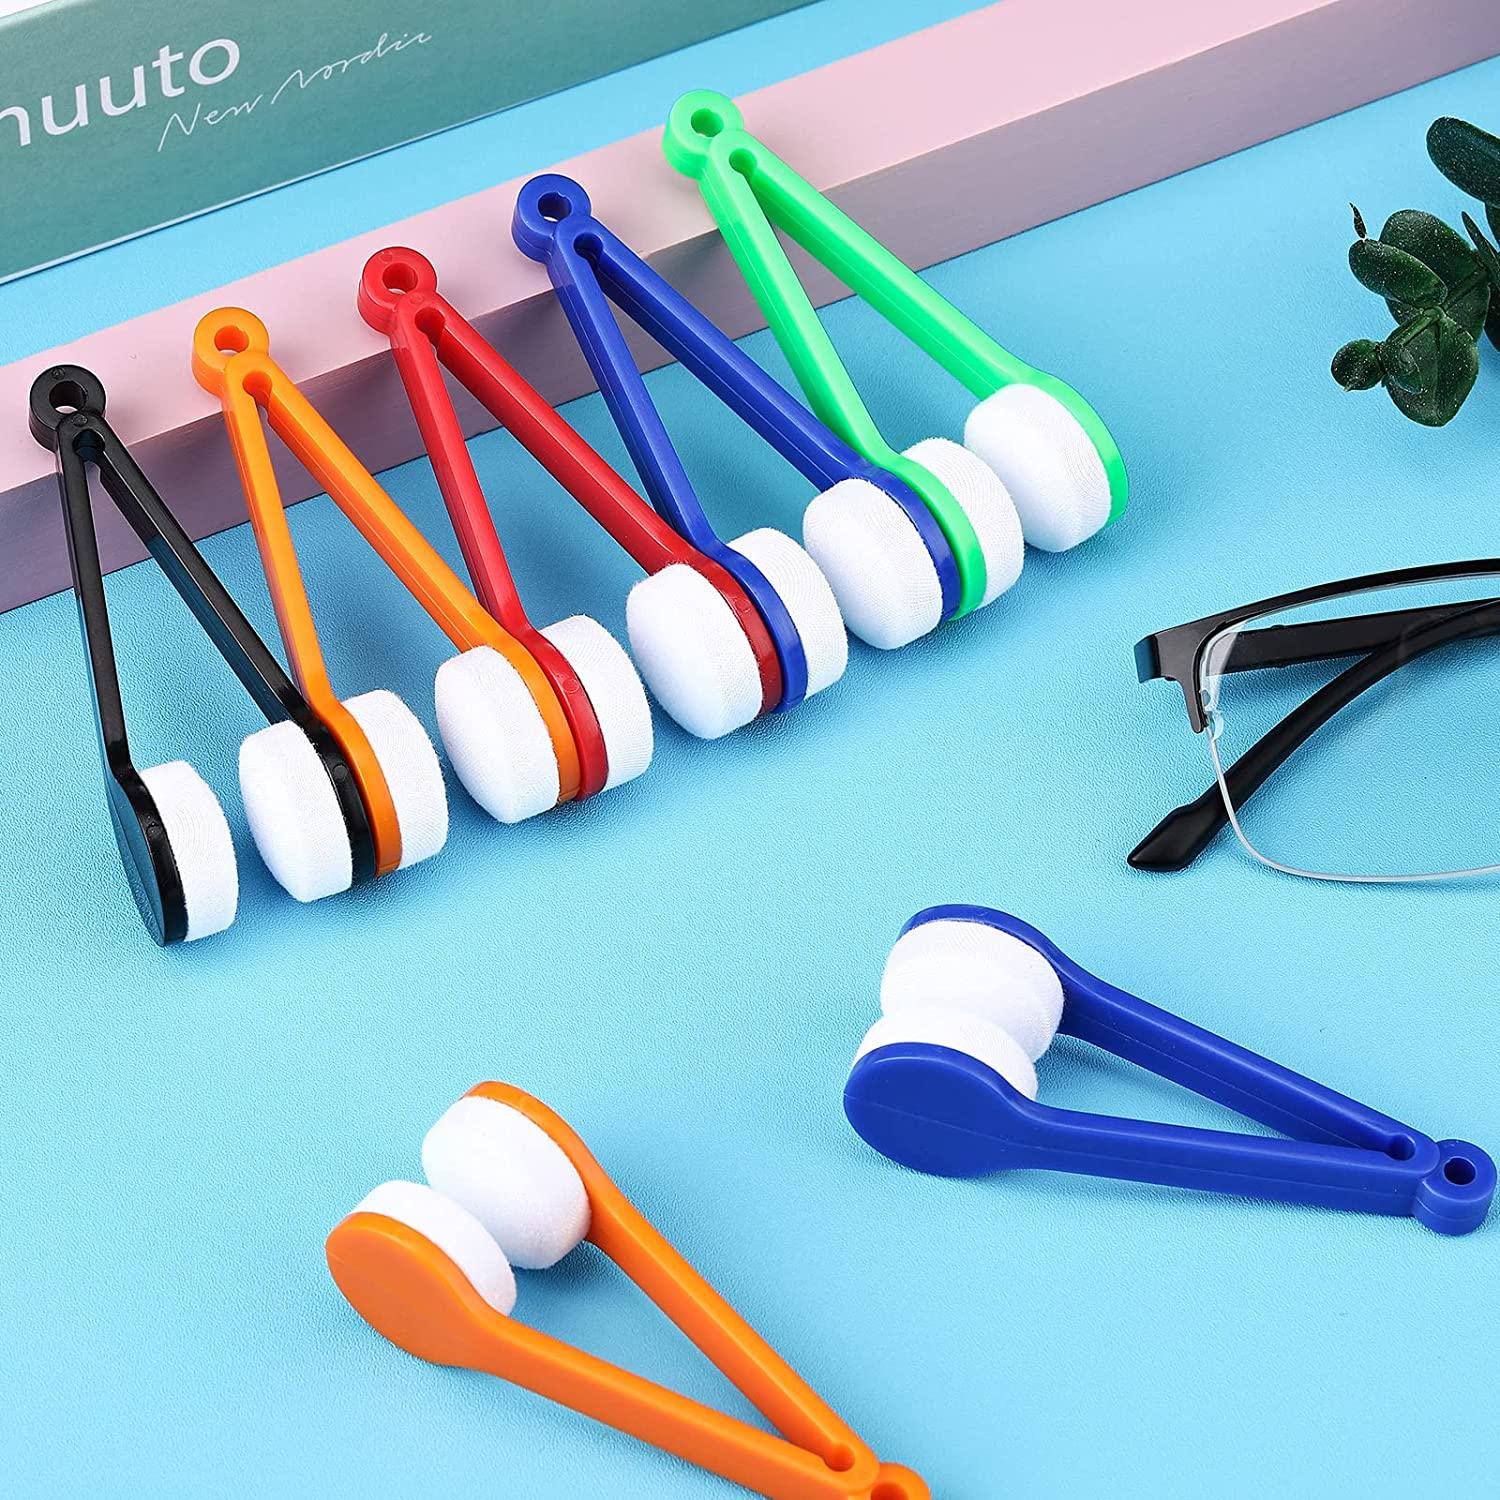 Mini Microfiber Spectacles Cleaner, Eyeglass Sun Glasses Cleaner, Soft Brush Cleaning Tool, Cleaning Clip, Microfiber, Super Light, Mini size, Easy